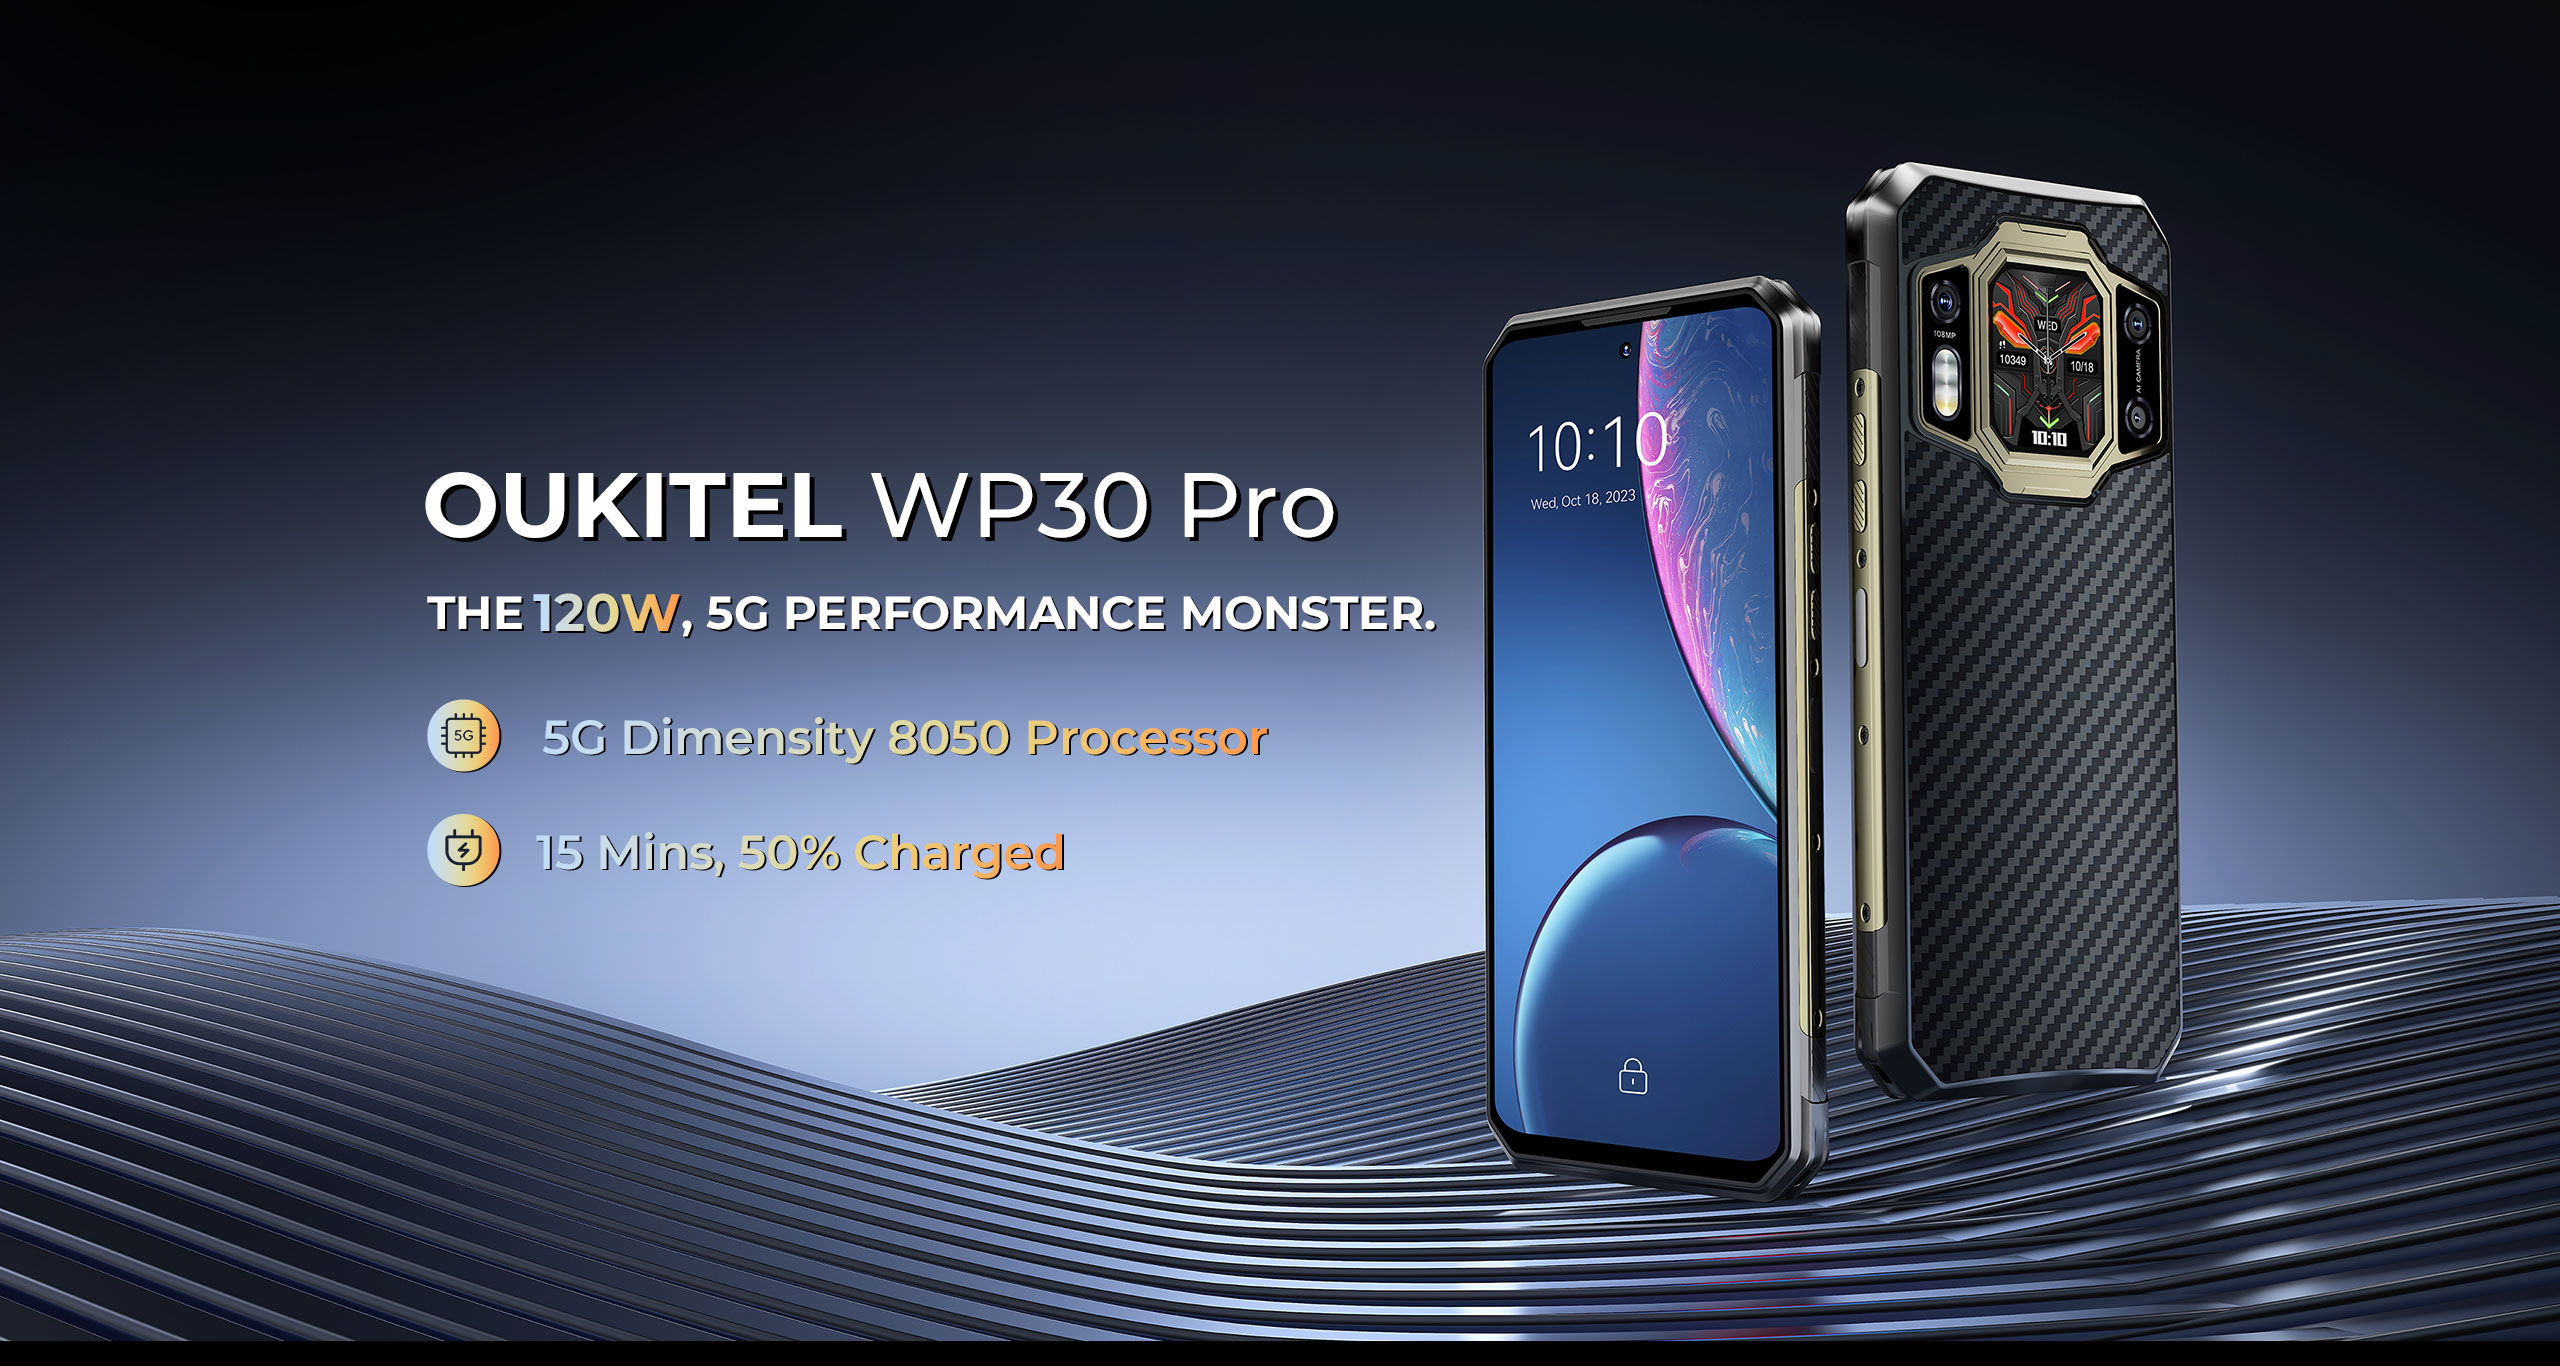 Oukitel WP33 Pro: New smartphone with massive 22,000 mAh battery, 5G and  loud speaker -  News